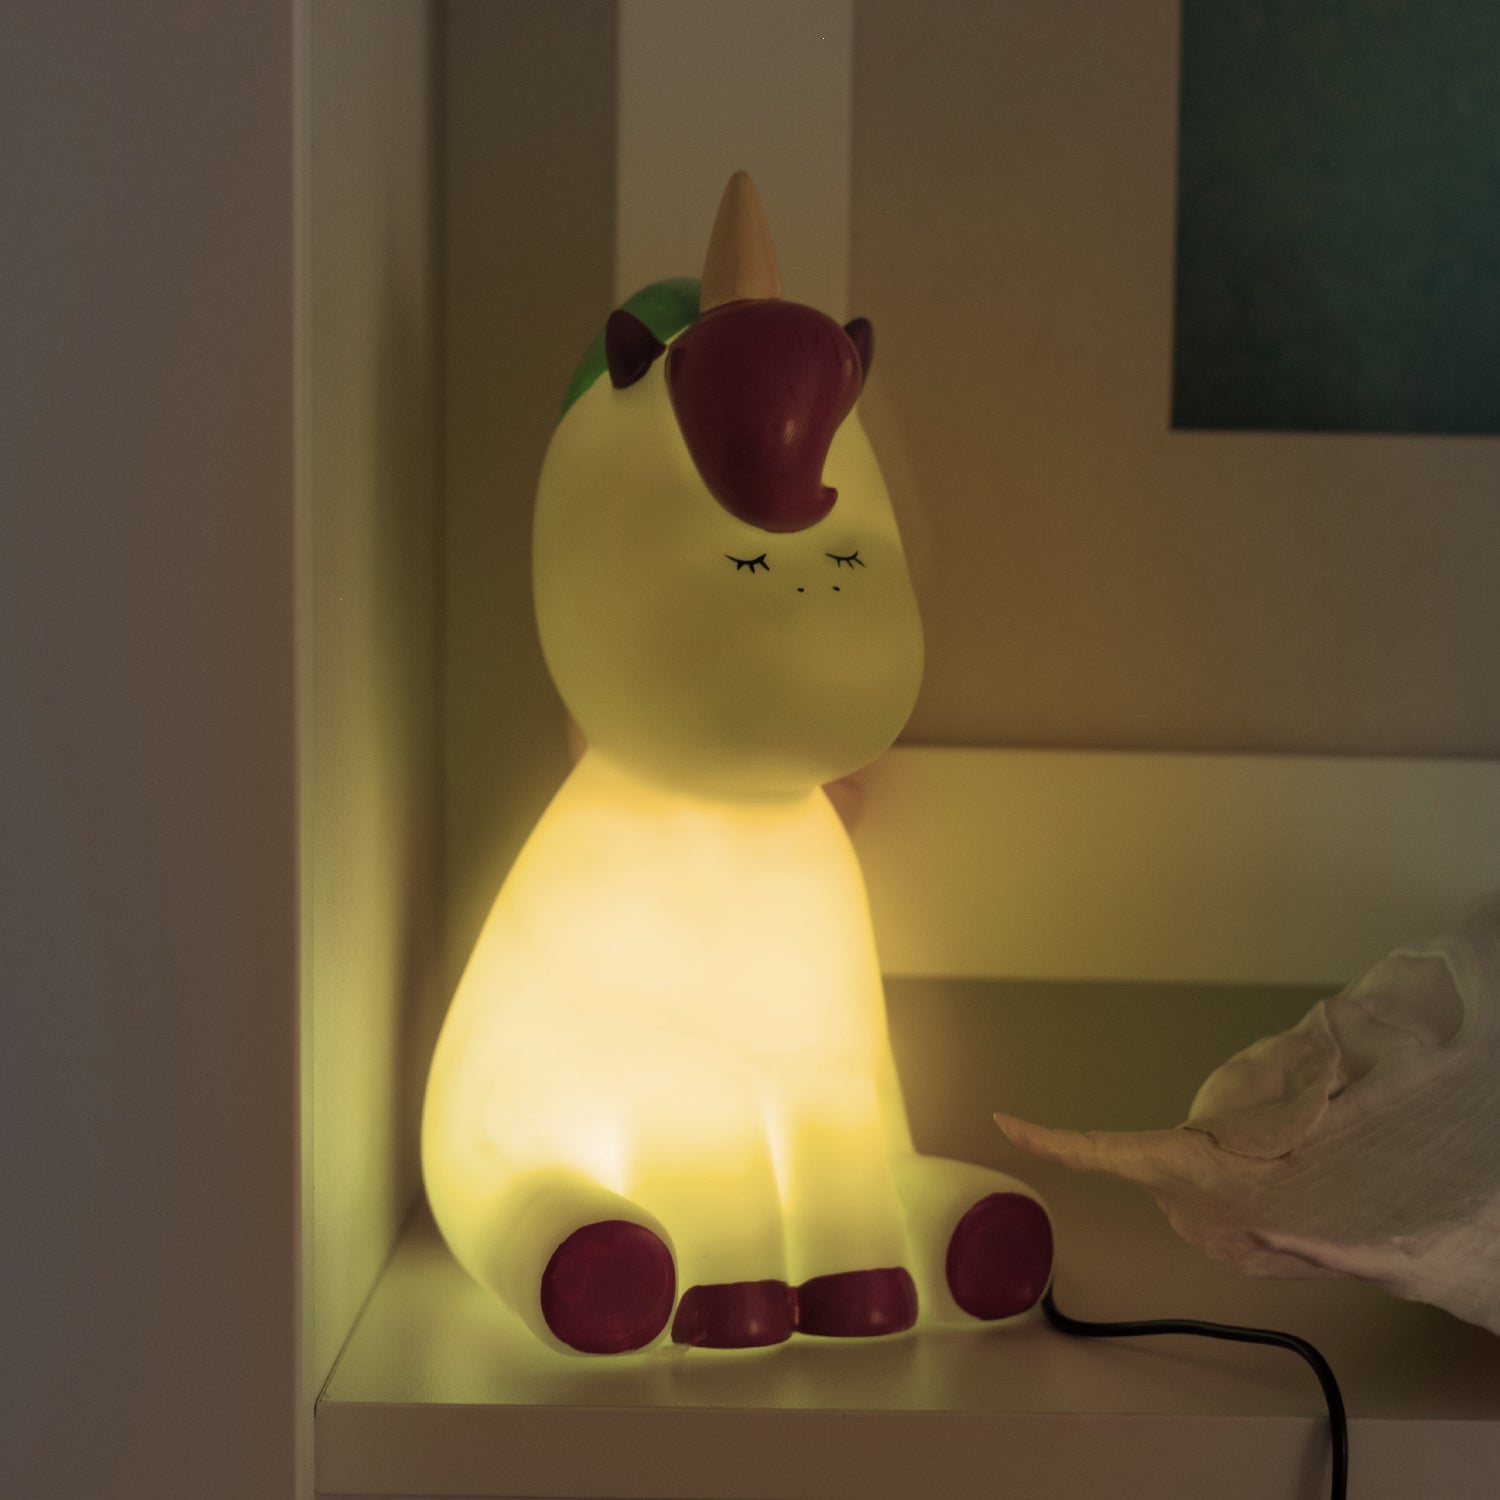 Sitting Unicorn-shaped blue night light. These newest Night Lights are set to be an incredible décor addition to any little ones' room and an amazing gift idea for all occasions - birthdays, christenings, holidays, and just because! Boasting a collection of creatures that are sure to both delight and soothe kids of all ages, Night Lights come with custom packaging that features a fun poem and are powered by a USB cord to ensure the Night Light stays bright.